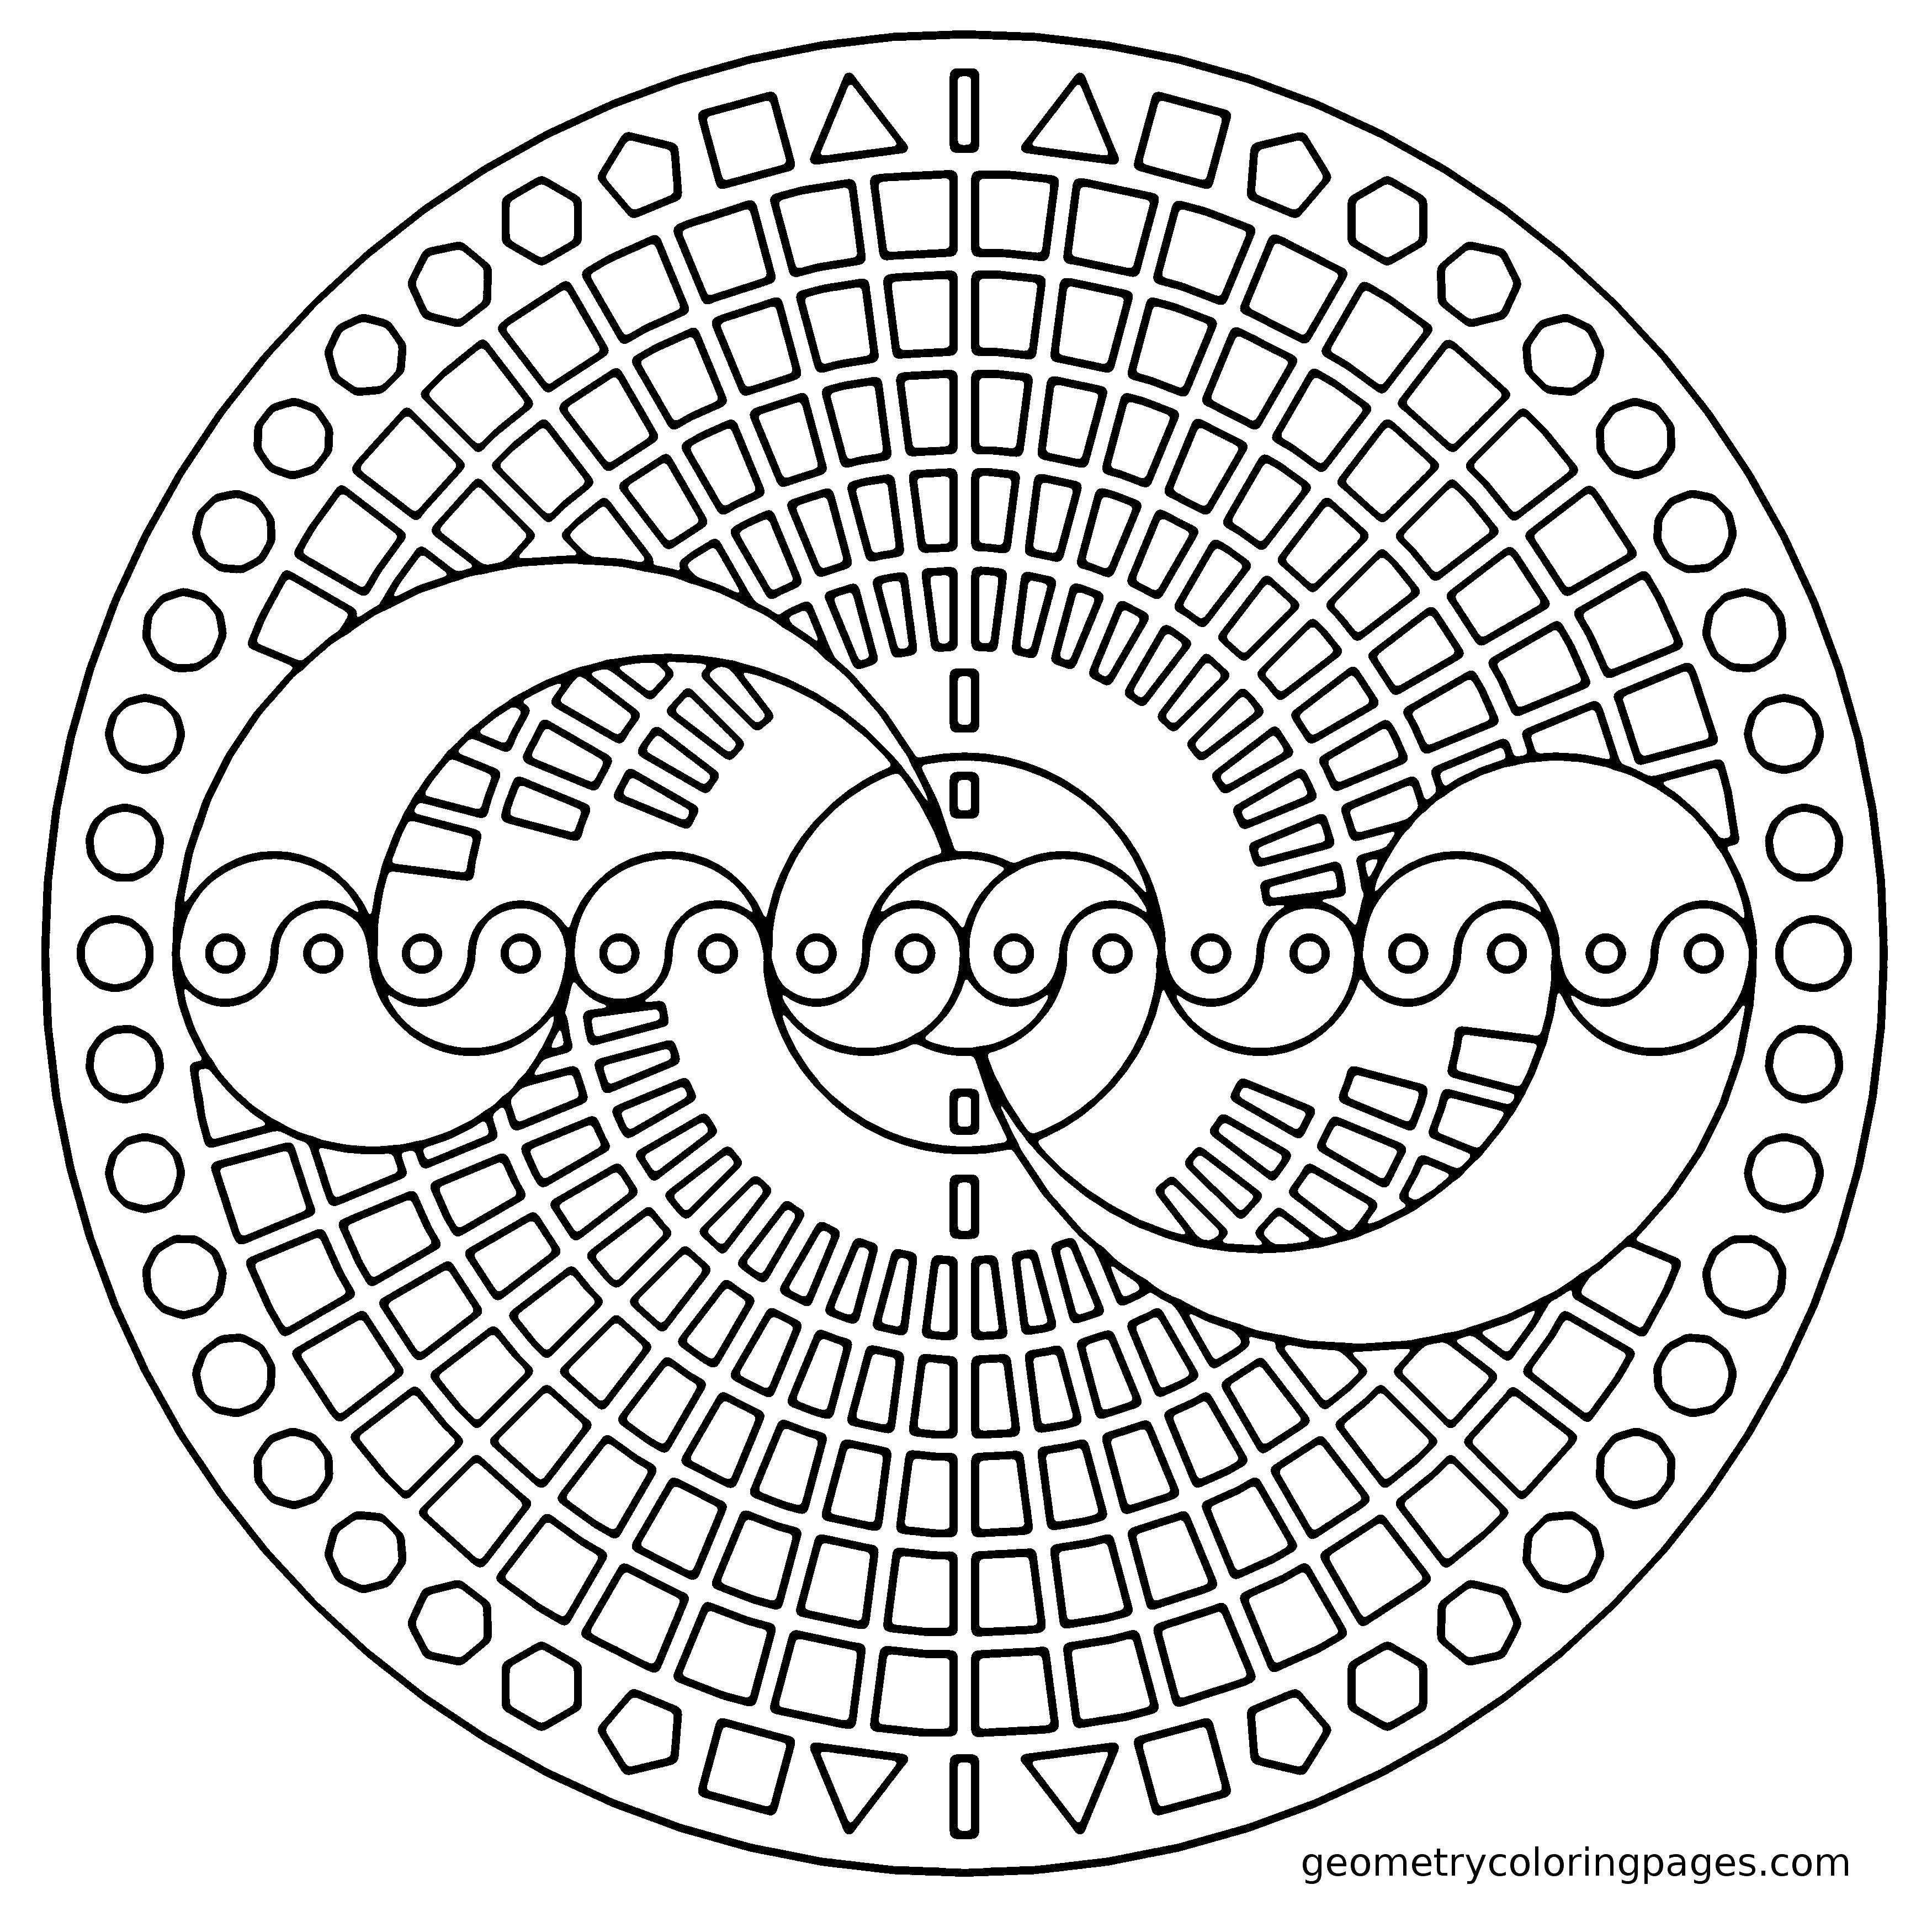 Coloring Pattern with geometric figures. Category With geometric shapes. Tags:  Patterns, geometric.